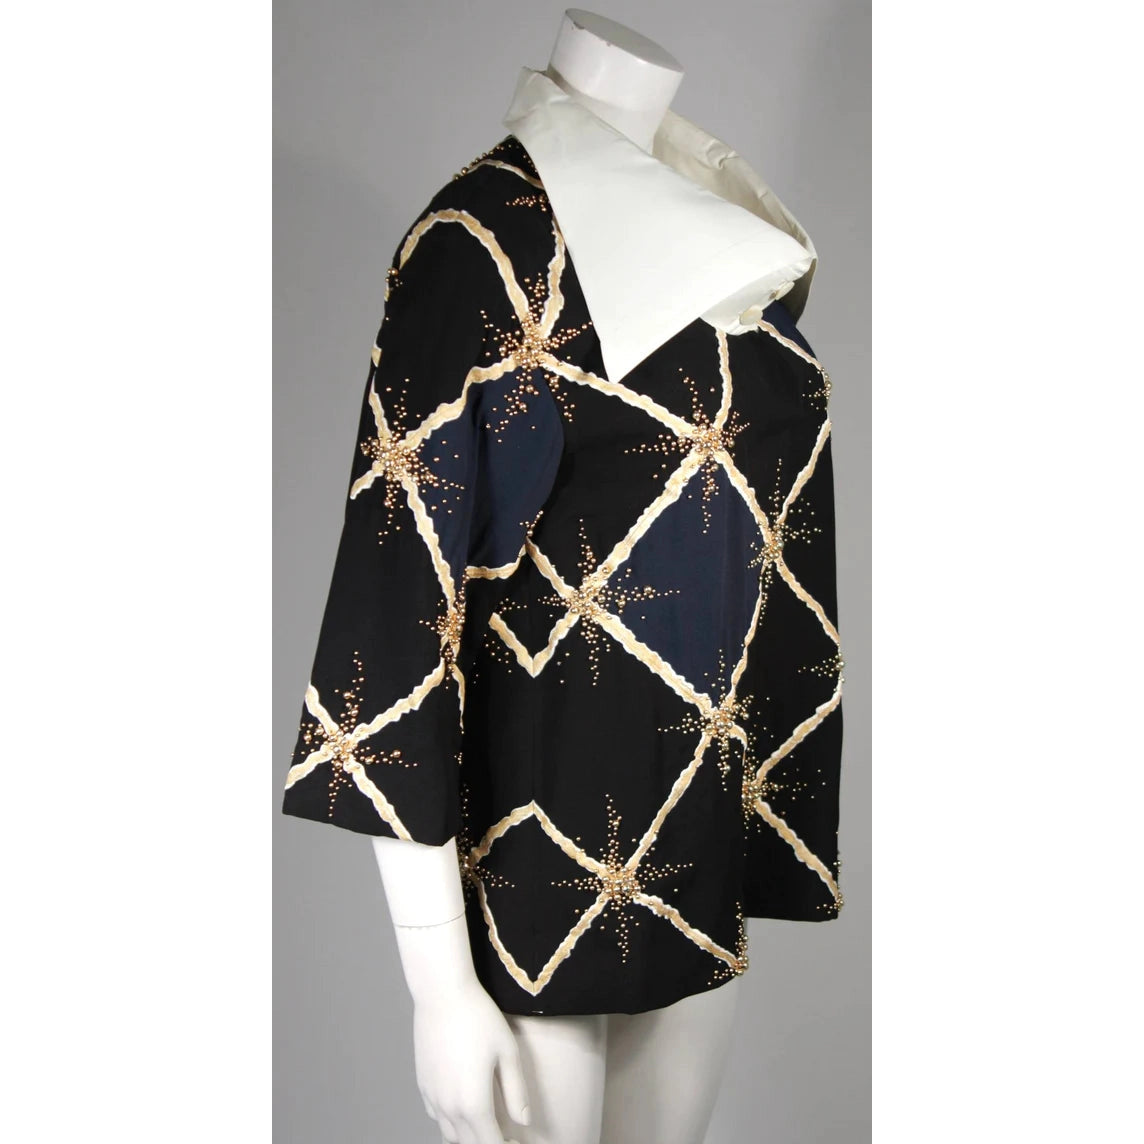 Pre-Owned PIERRE BALMAIN Embellished Blouse w/ Exaggerated Collar | Small - theREMODA